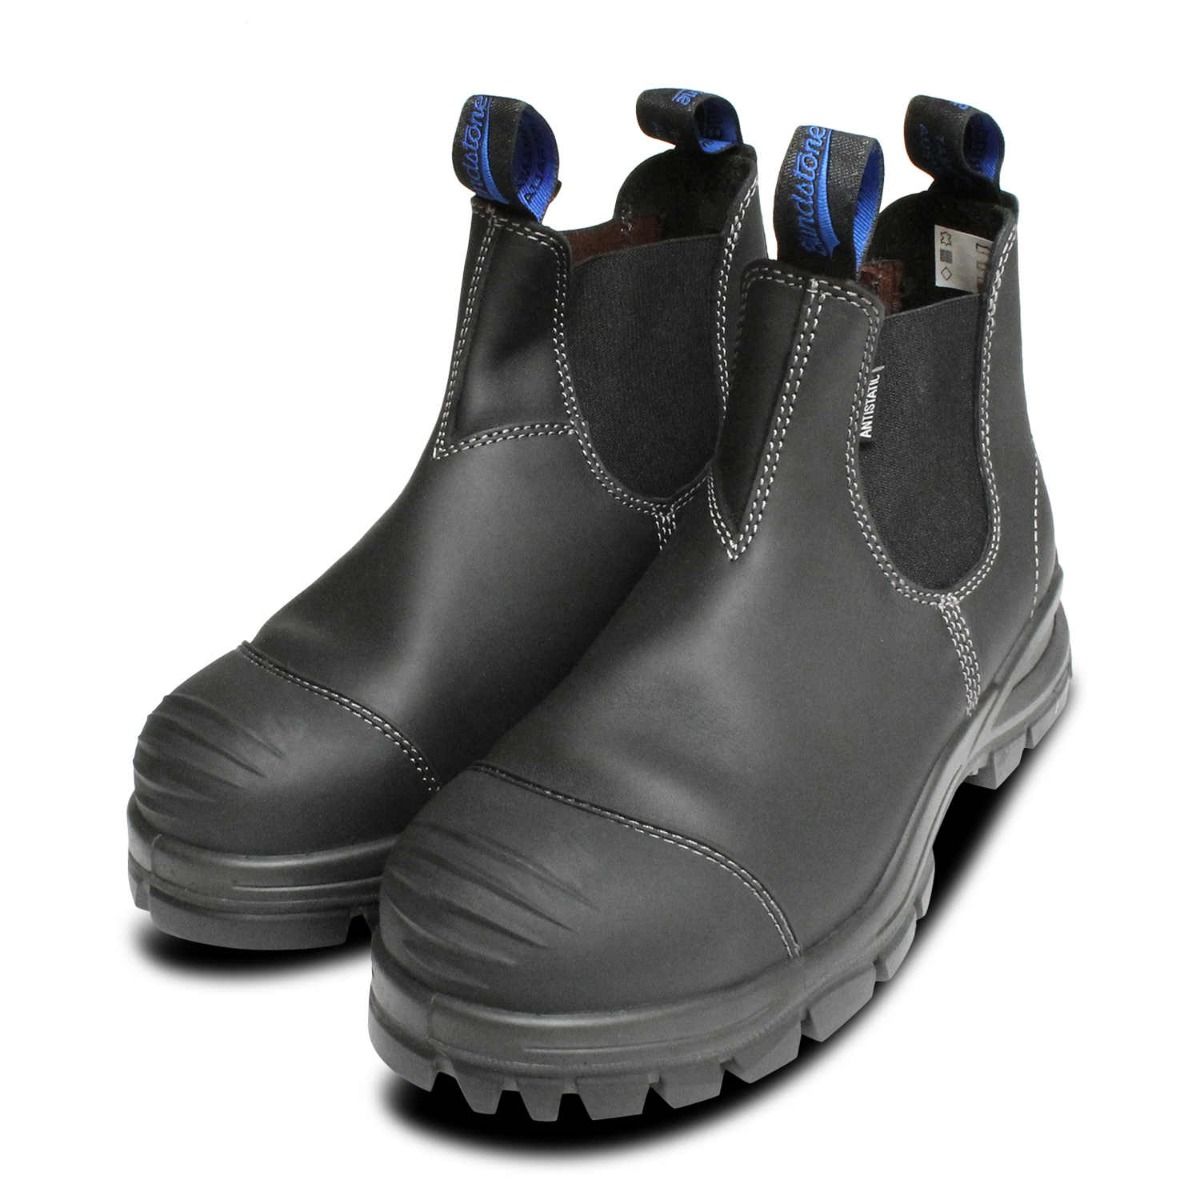 Blundstone 910 Steel Toe Safety Boots 